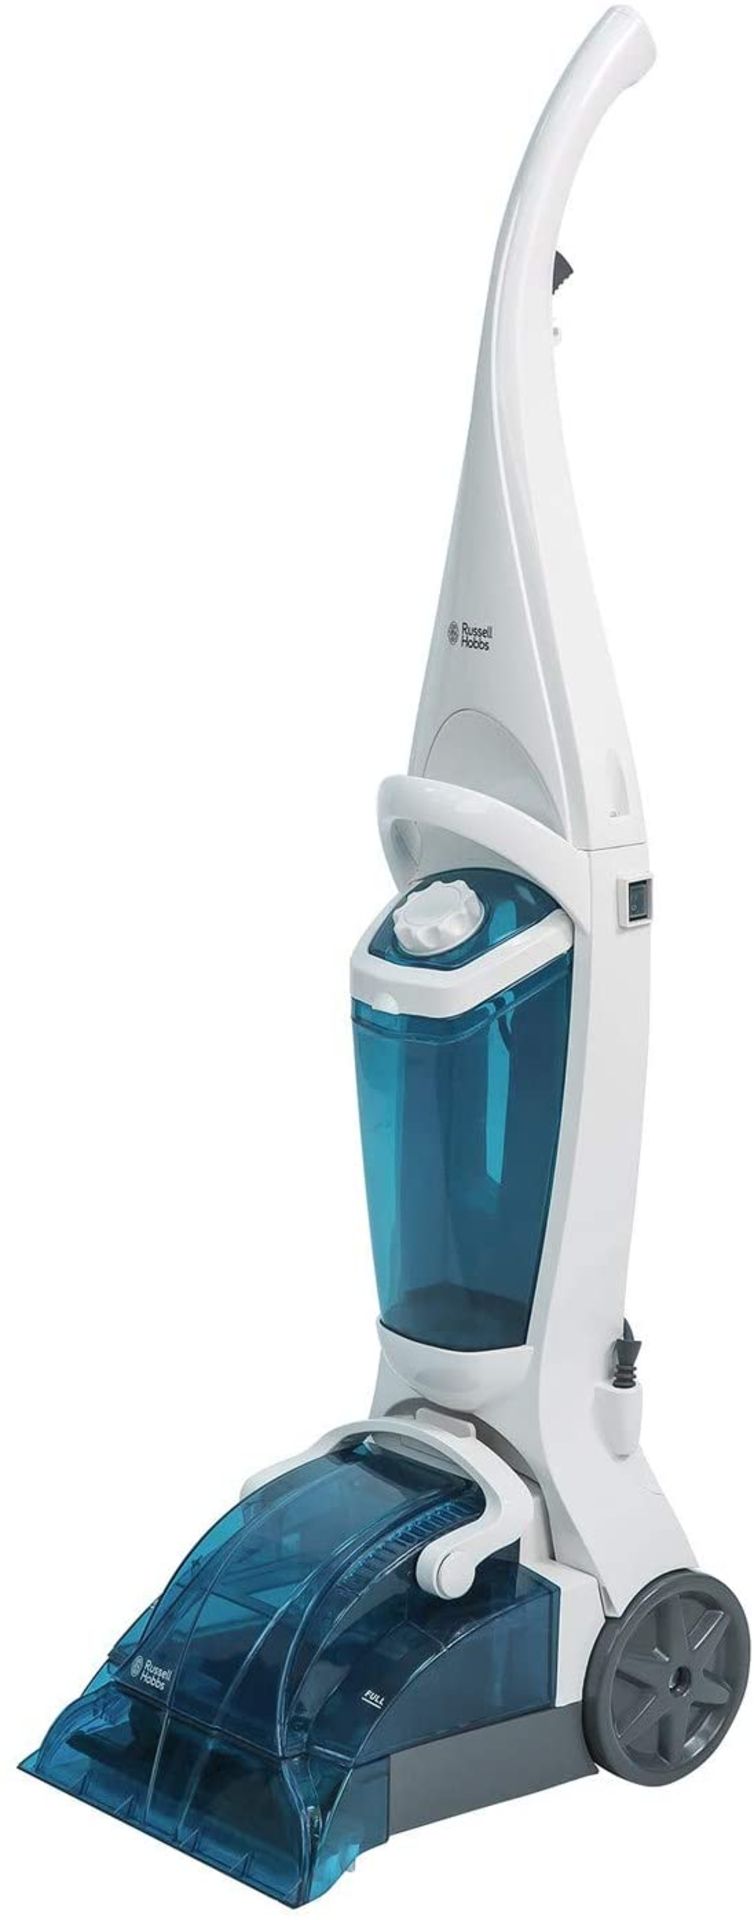 RUSSELL HOBBS REFRESH & CLEAN CARPET WASHER RRP £69.99Condition ReportAppraisal Available on Request